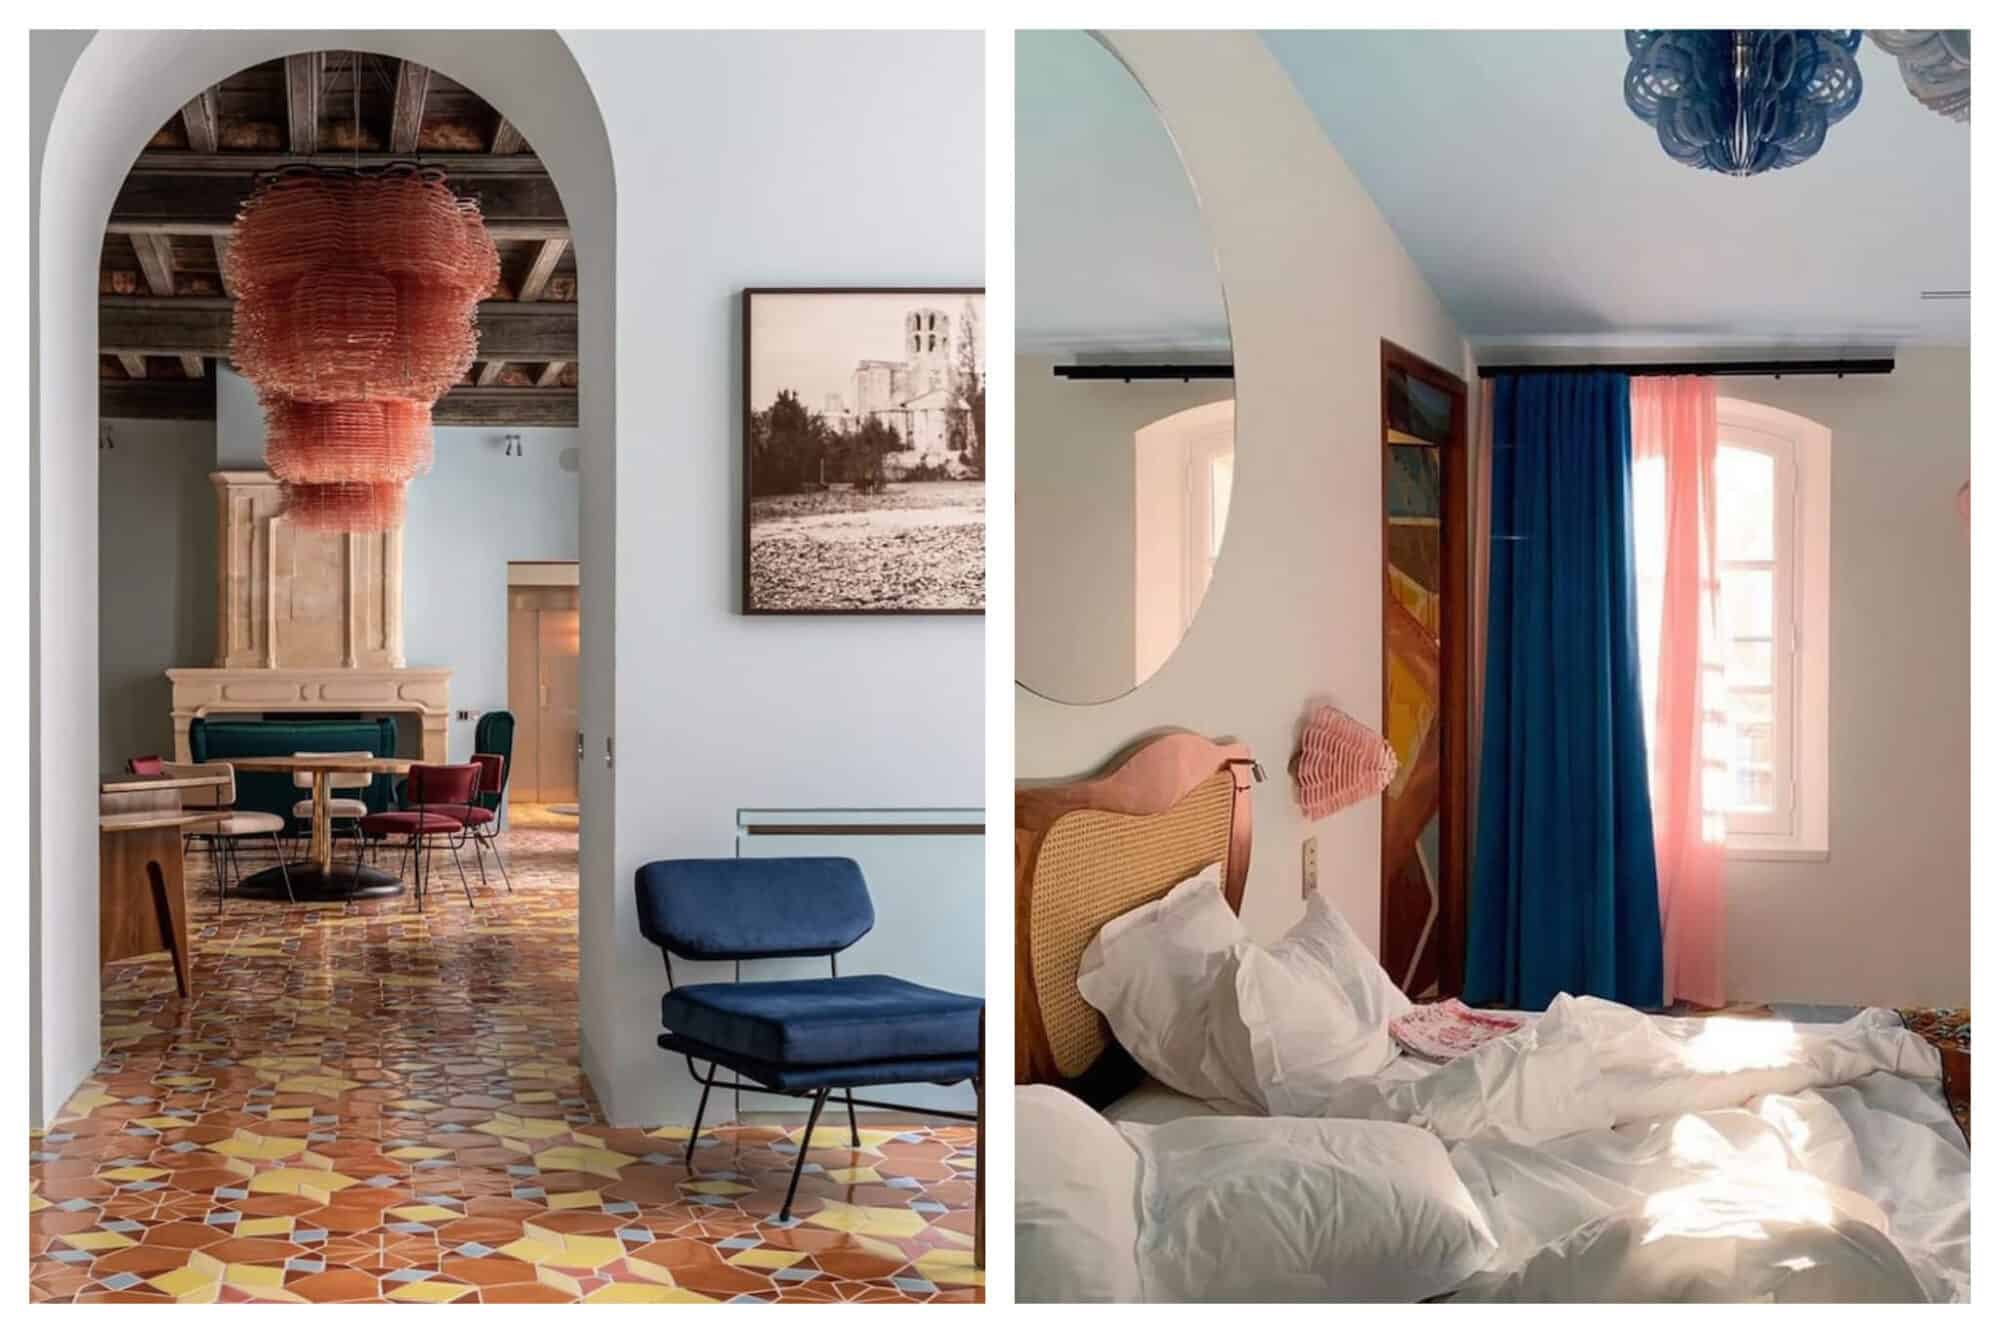 Interior shots of the beautifully decorated and designed L'Arlatan in Arles, complete with a light blue, pink, white and orange color scheme.